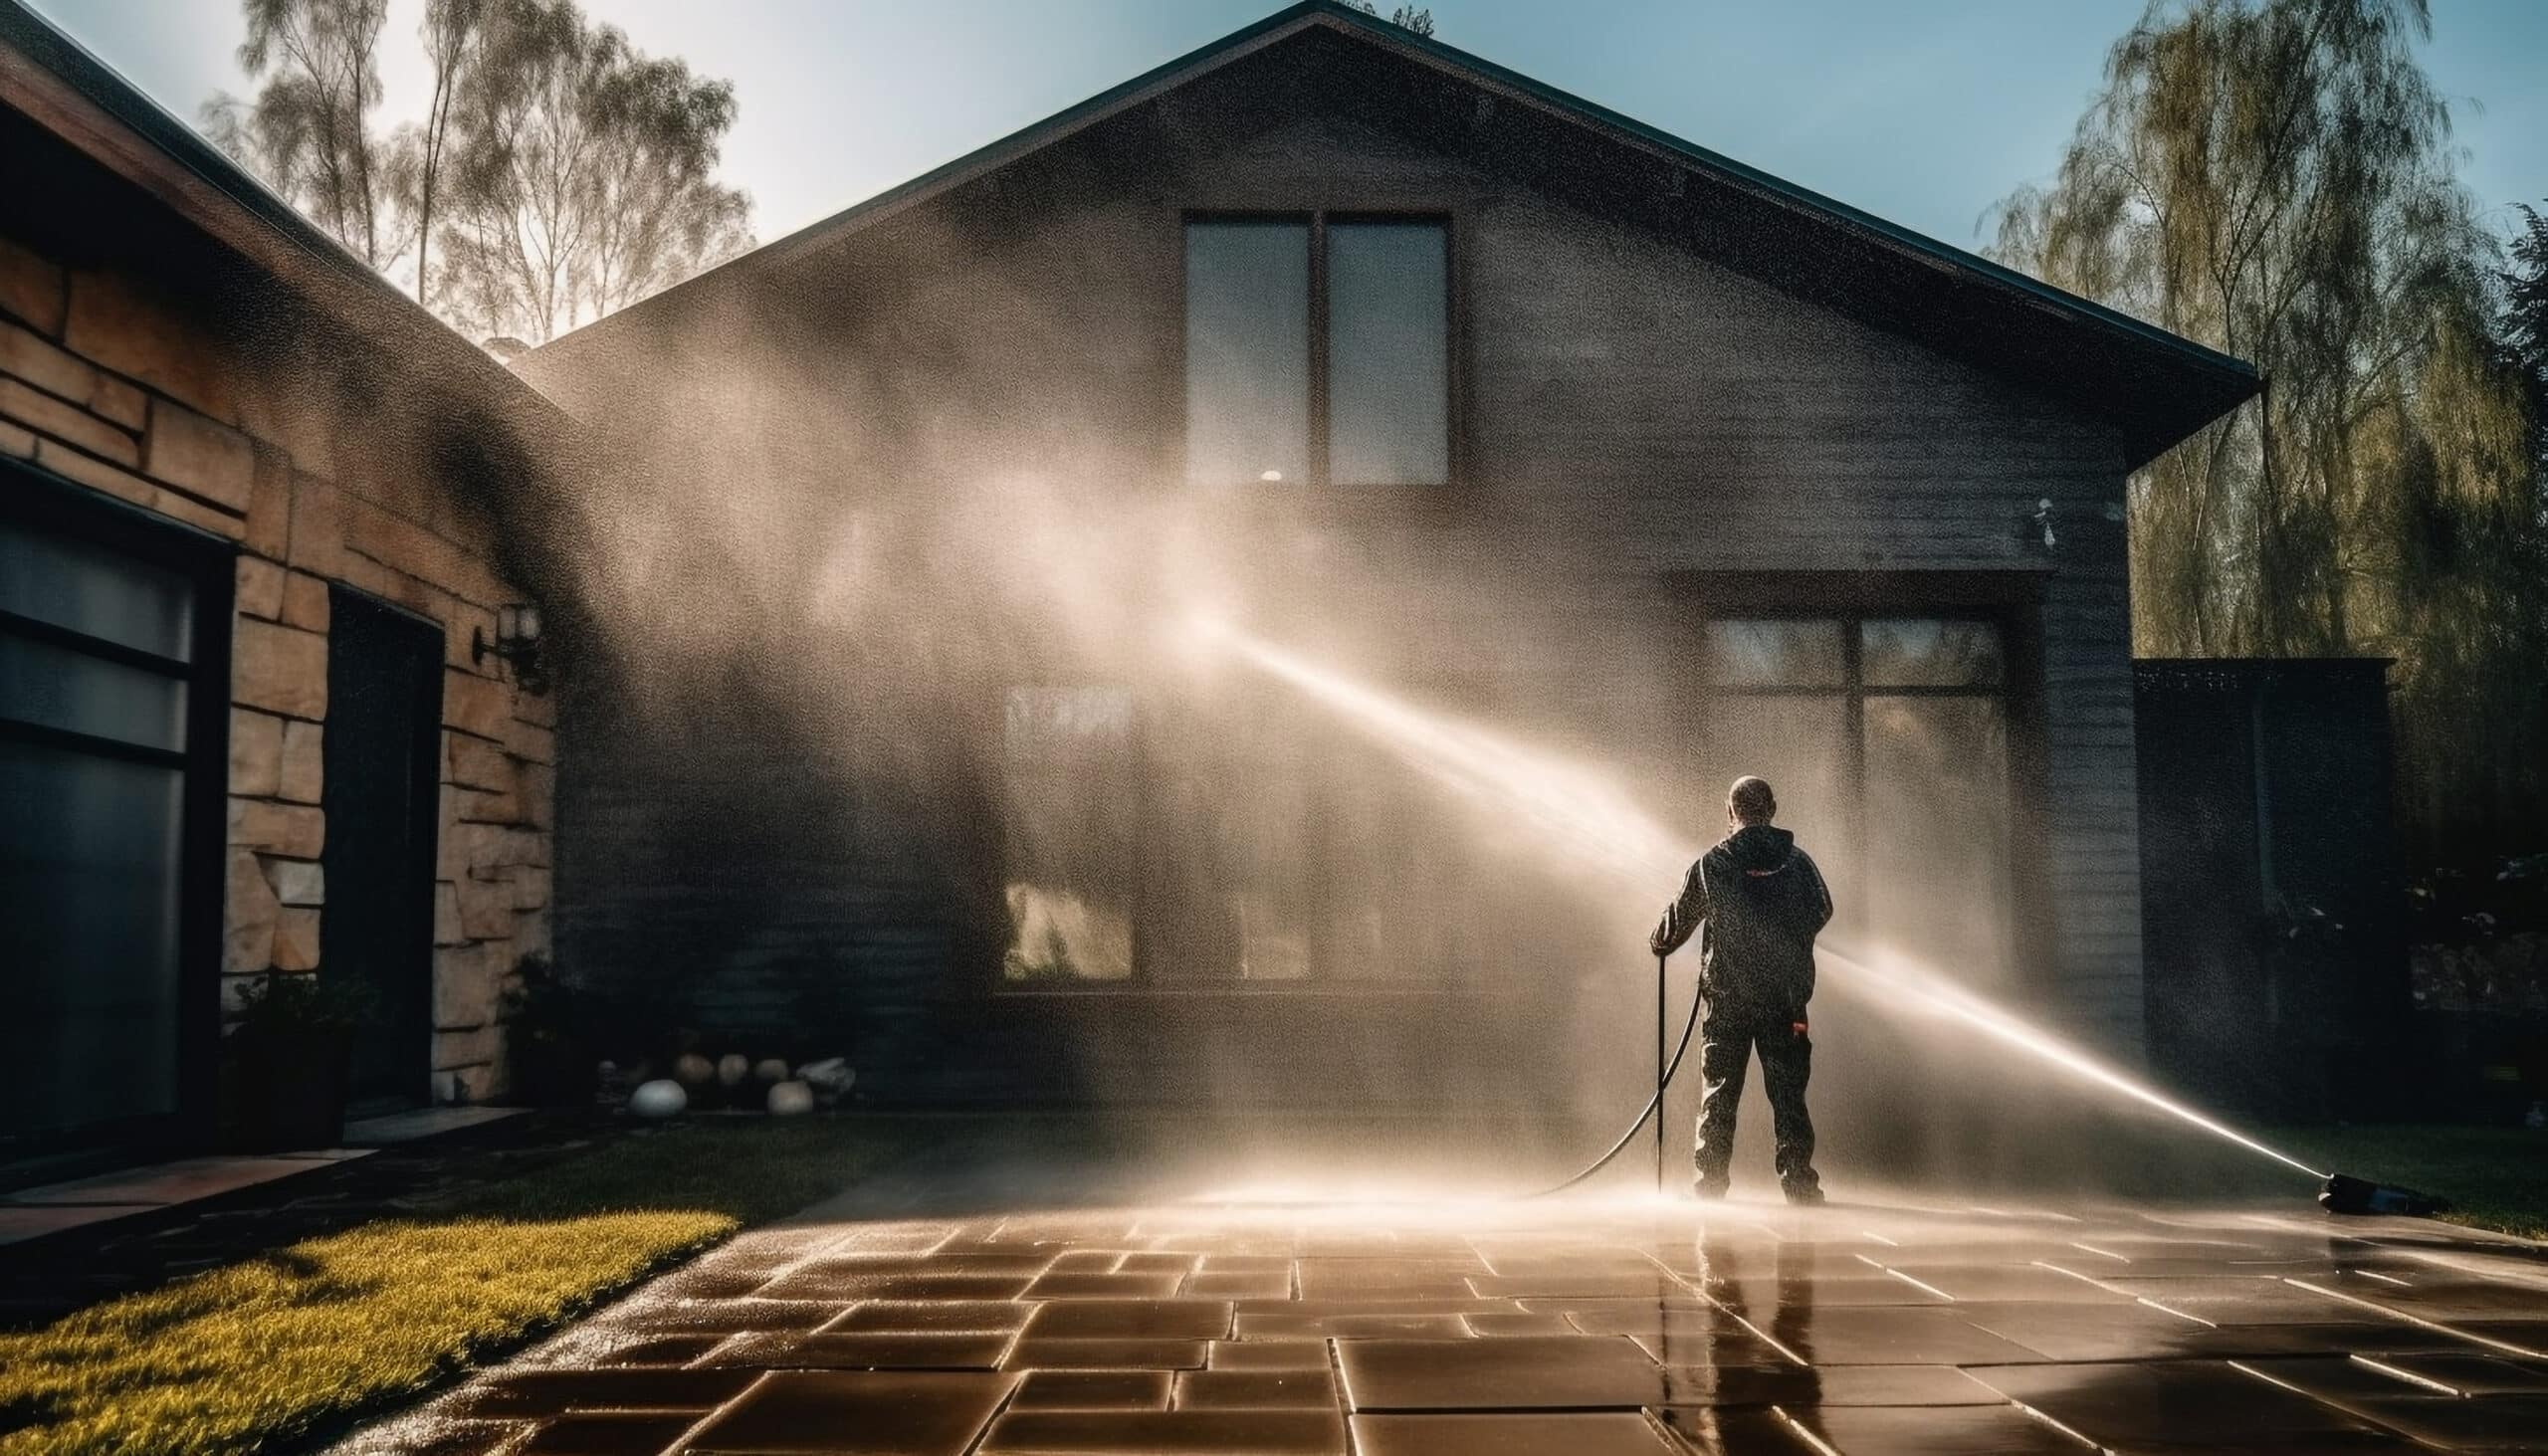 www.appr.com : What is the average lifespan of an electric pressure washer?